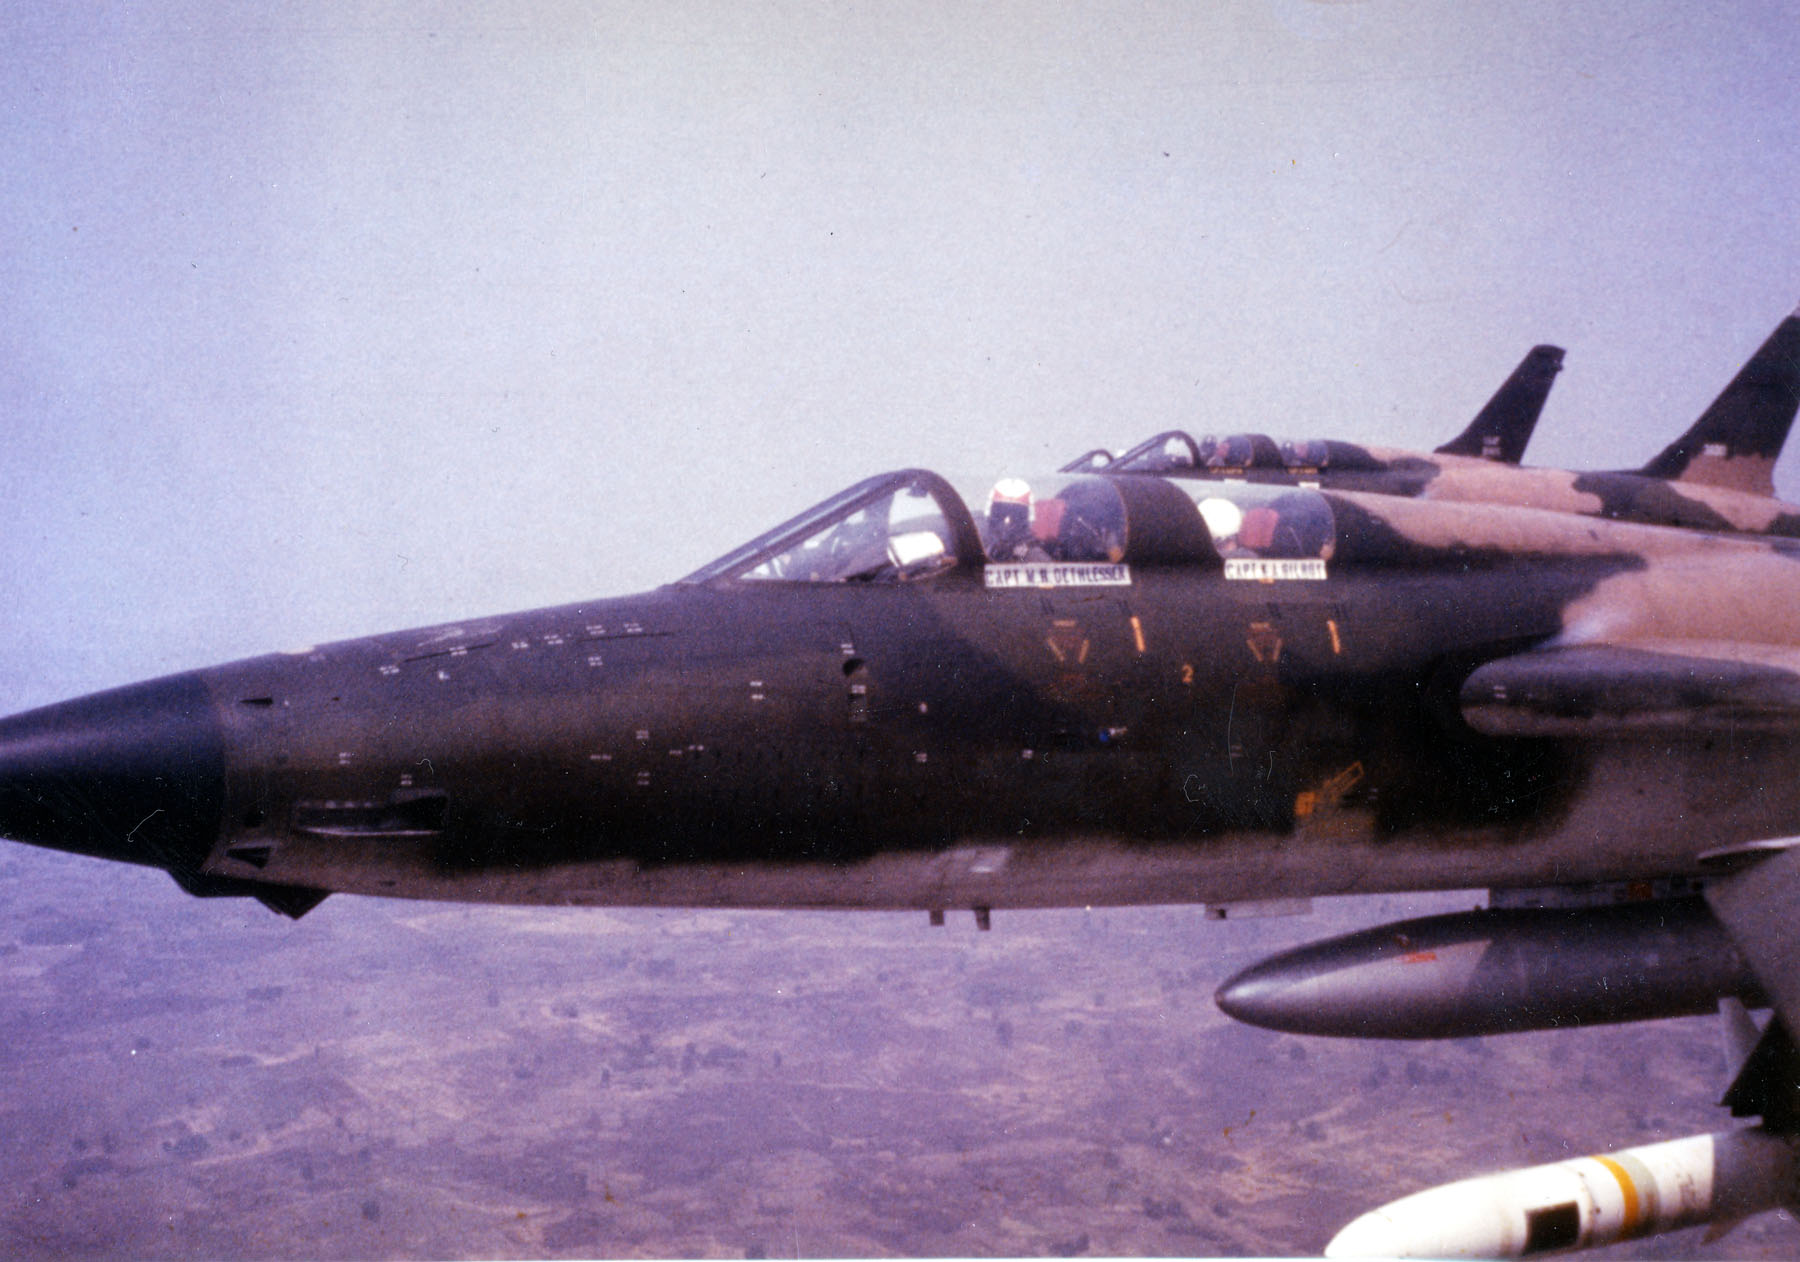 A Republic F-105F Thunderchief Wild Weasel III, flown by Captain Merlyn F. Dethlefsen and Captain Kevin A. Gilroy. (U.S. Air Force)